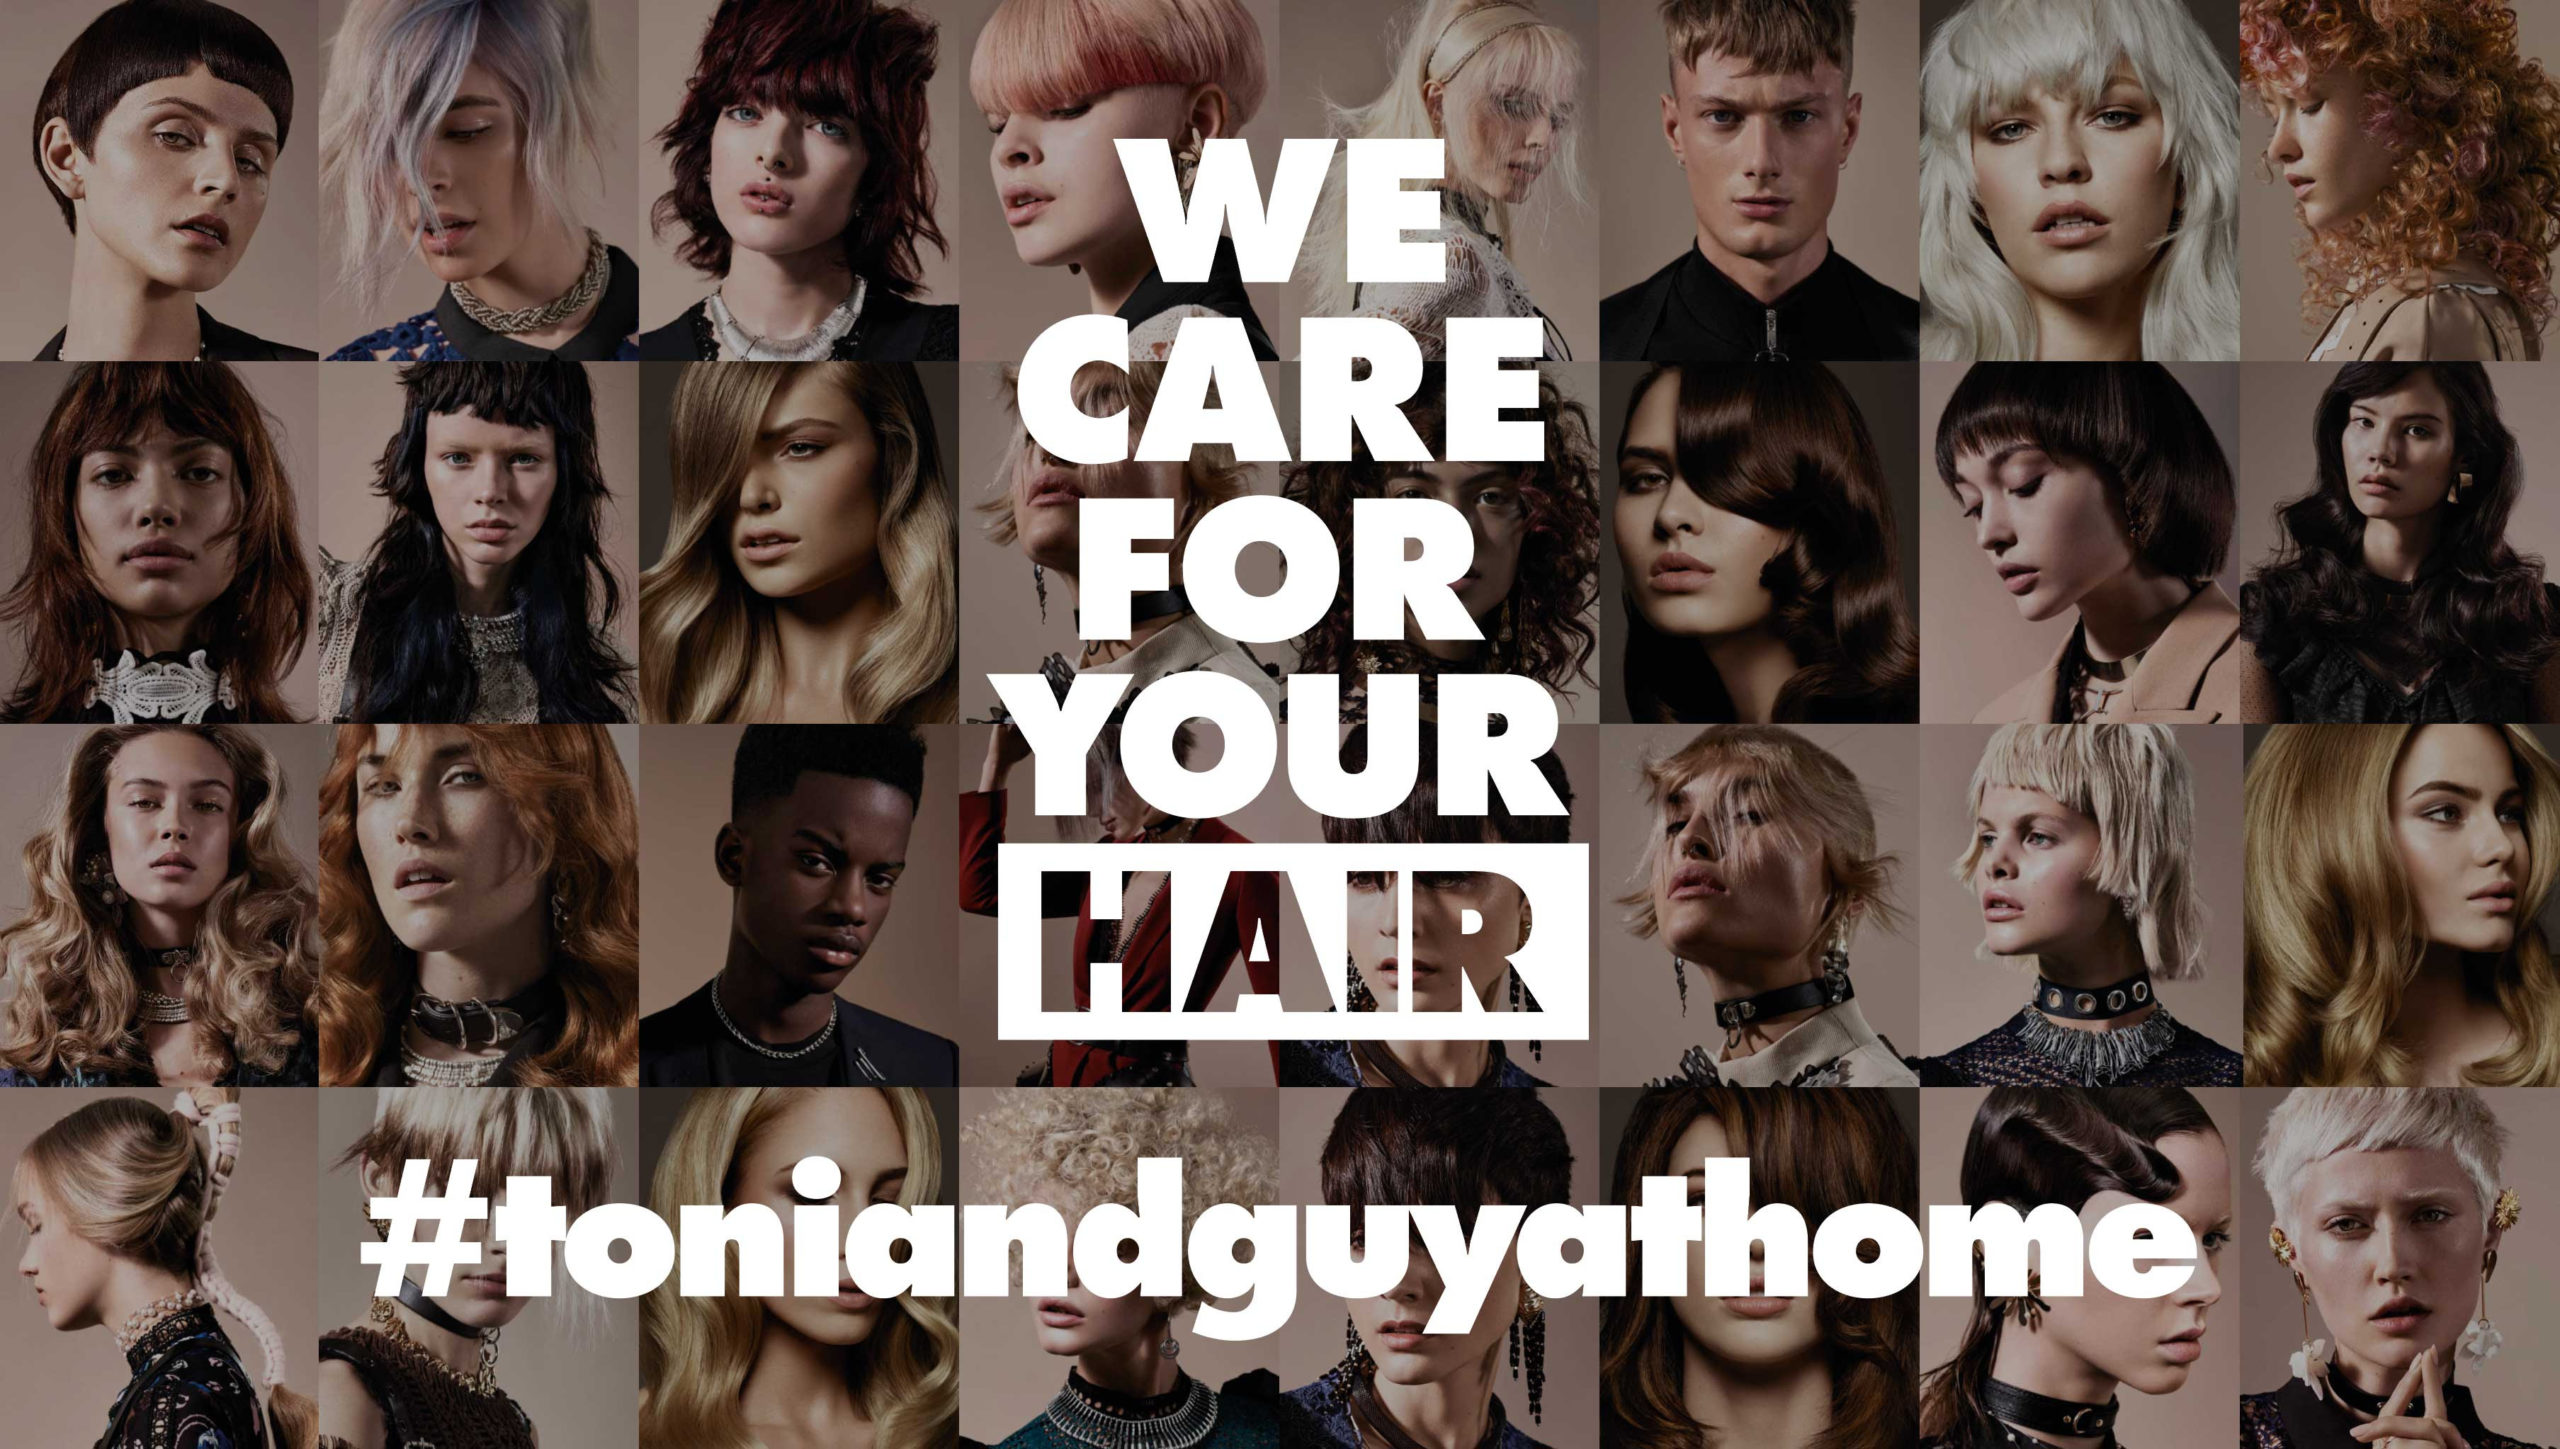 TONI&GUY - ROCK YOUR ROOTS with Toni and guy at home